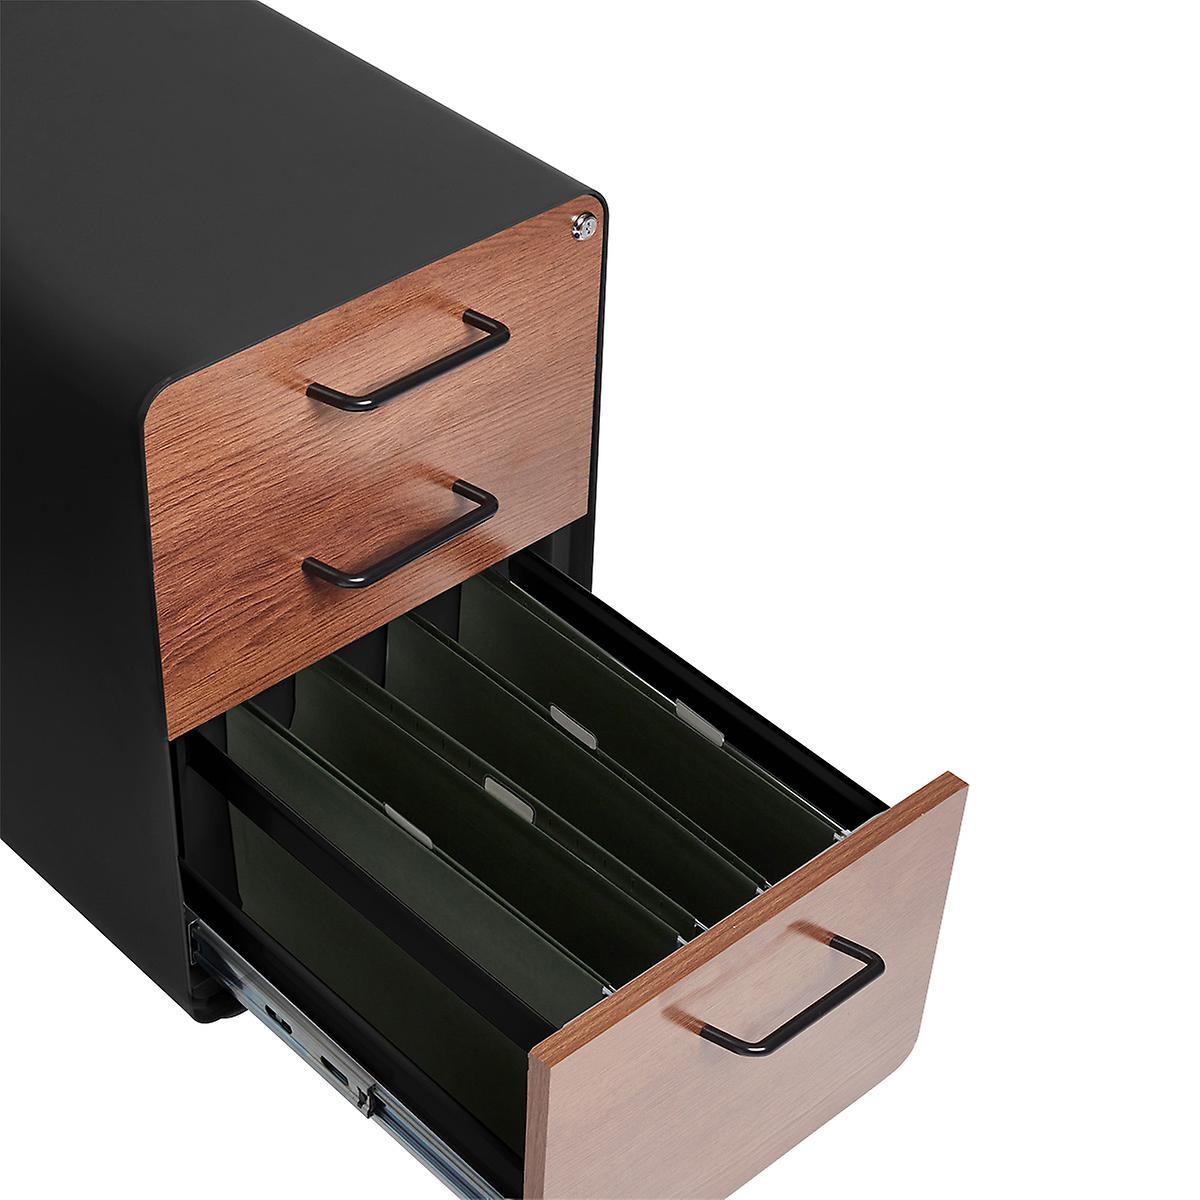 Poppin 3 Drawer Stow Locking File The Container Store